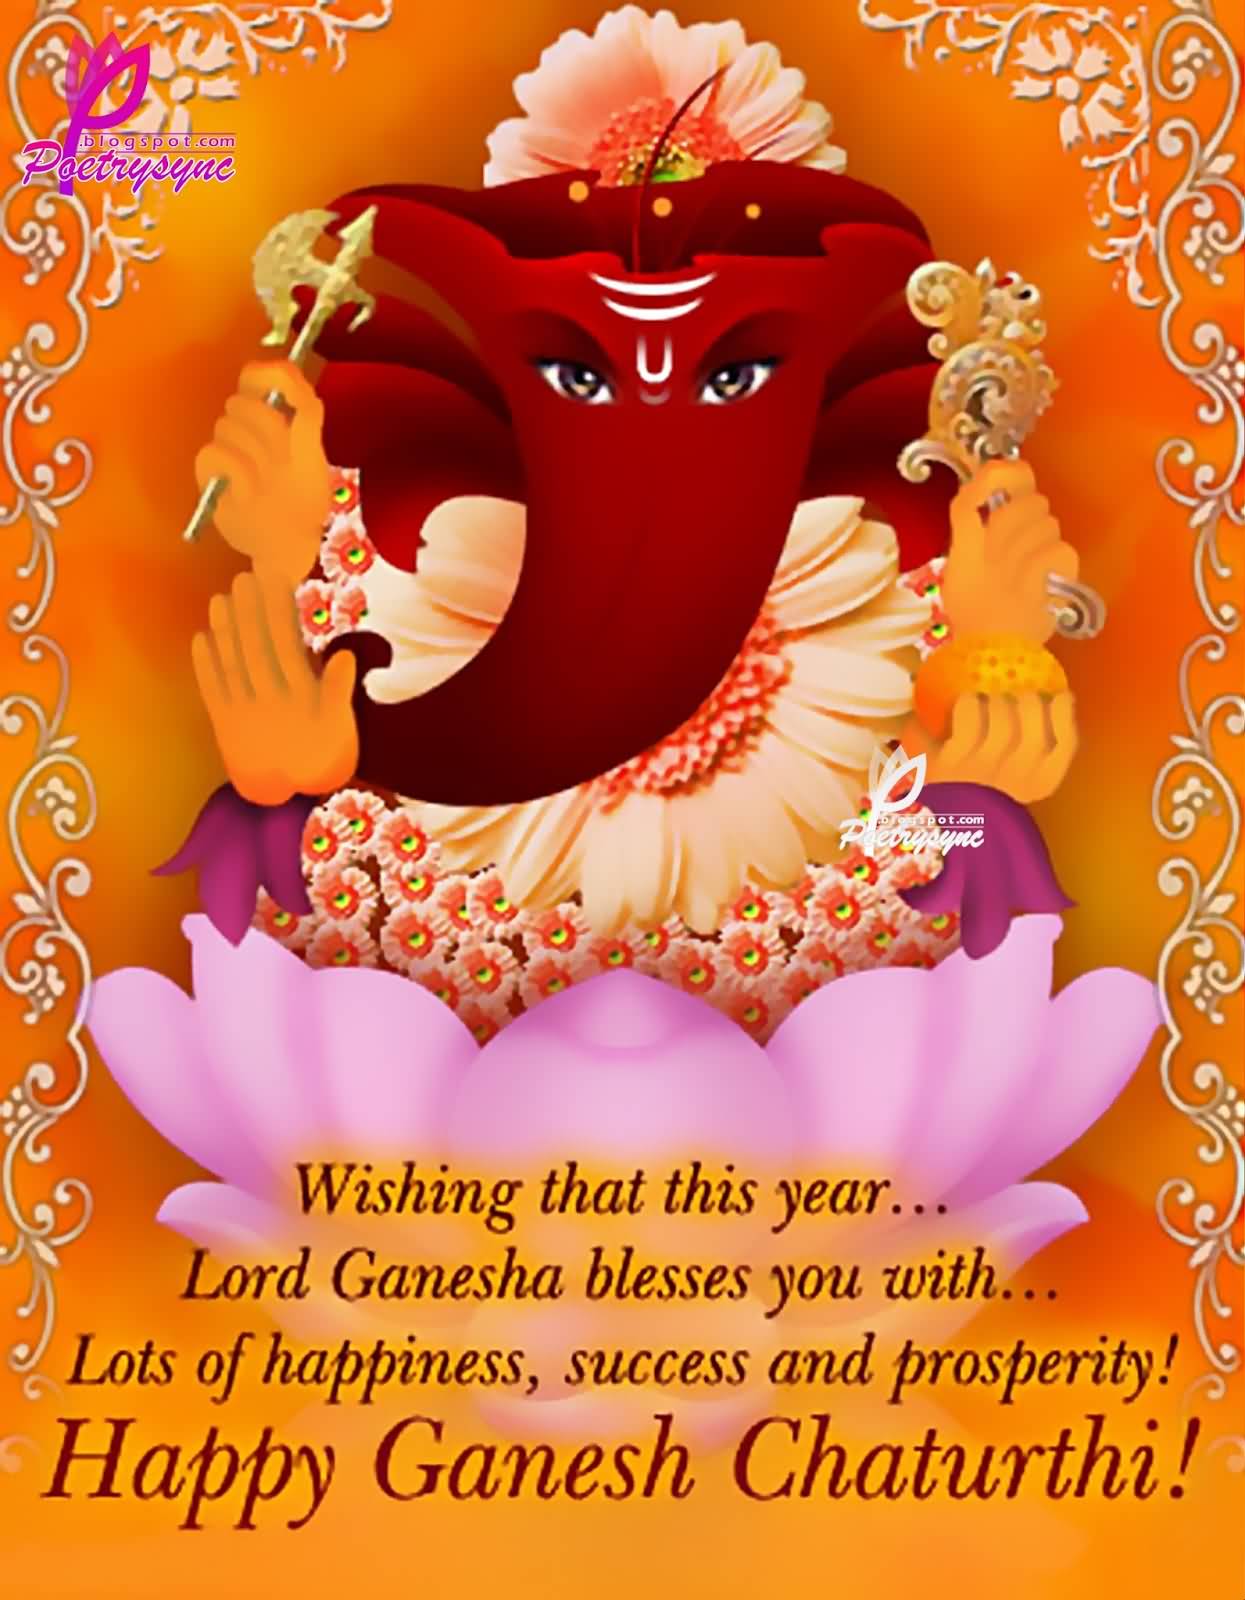 Wishing That This Year Lord Ganesha Blesses You With Lots Of Happiness, Success And Prosperity Happy Ganesh Chaturthi